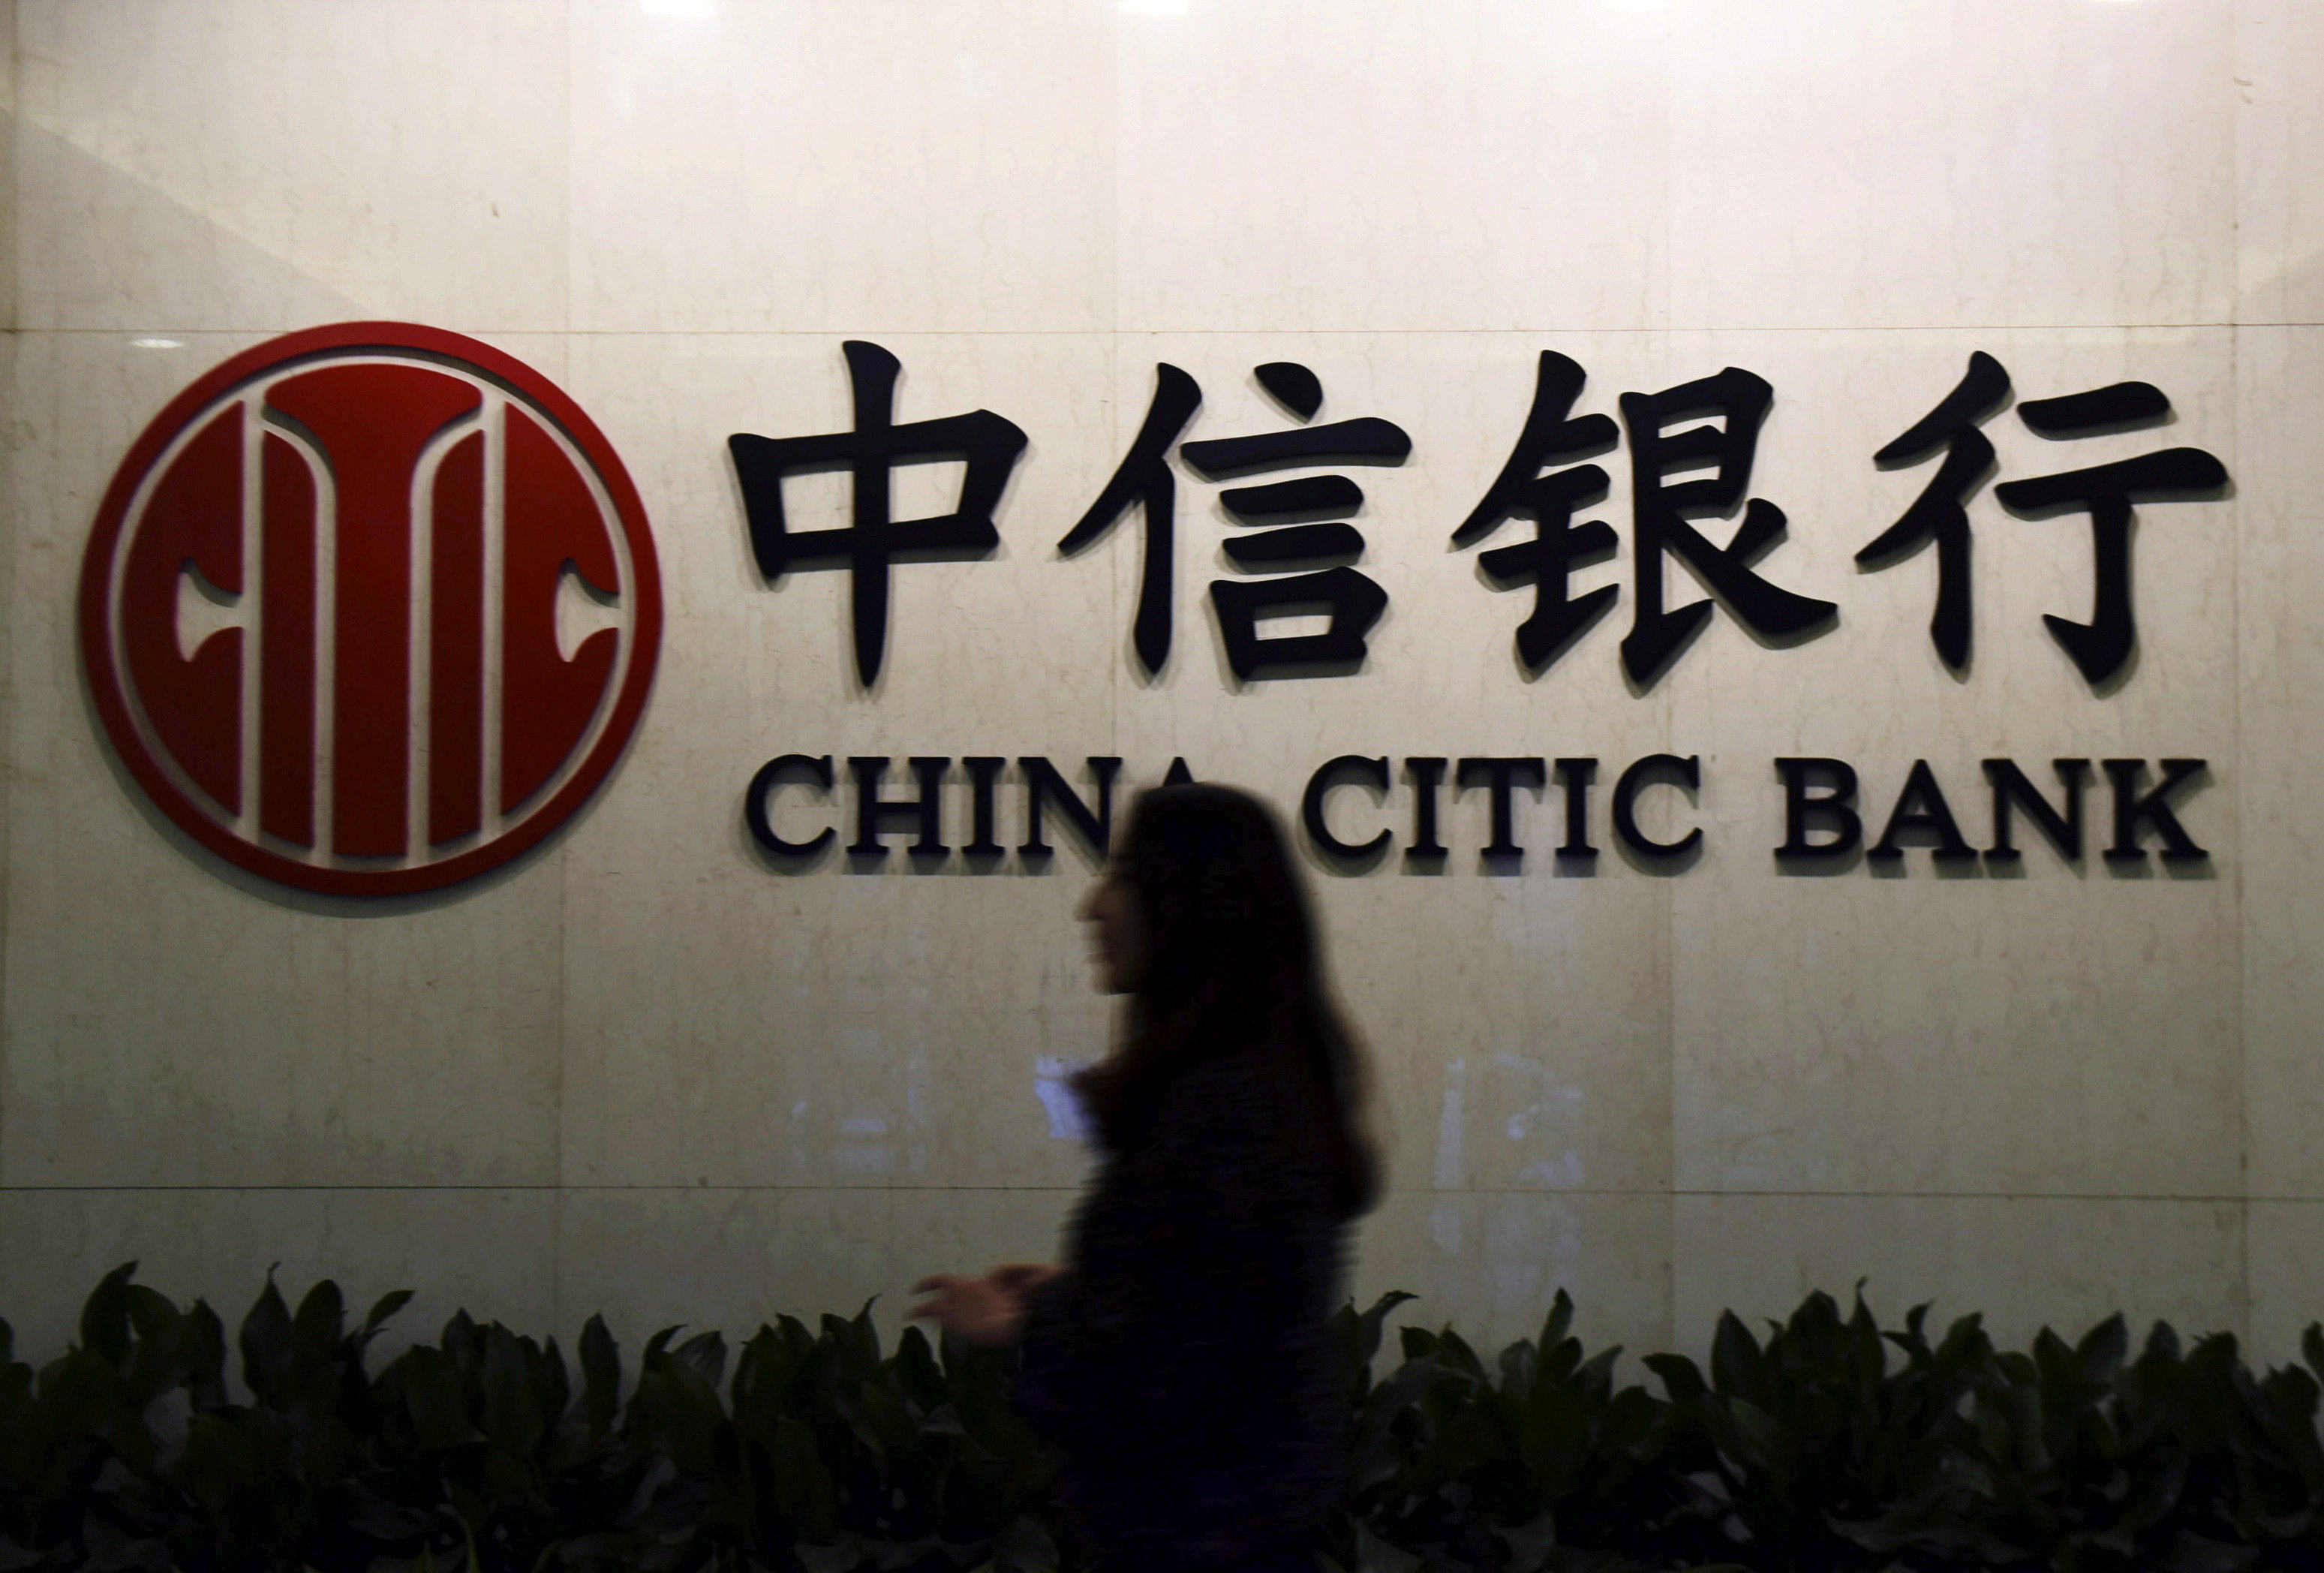 A customer walks past the company logo of China CITIC Bank, at a branch in Hangzhou, Zhejiang province, China. State-backed China Citic Bank has the biggest weighting on the CSI Dividend Index which has outperformed the main CSI 300 benchmark every year since 2021, when the market downturn commenced. Photo: Reuters